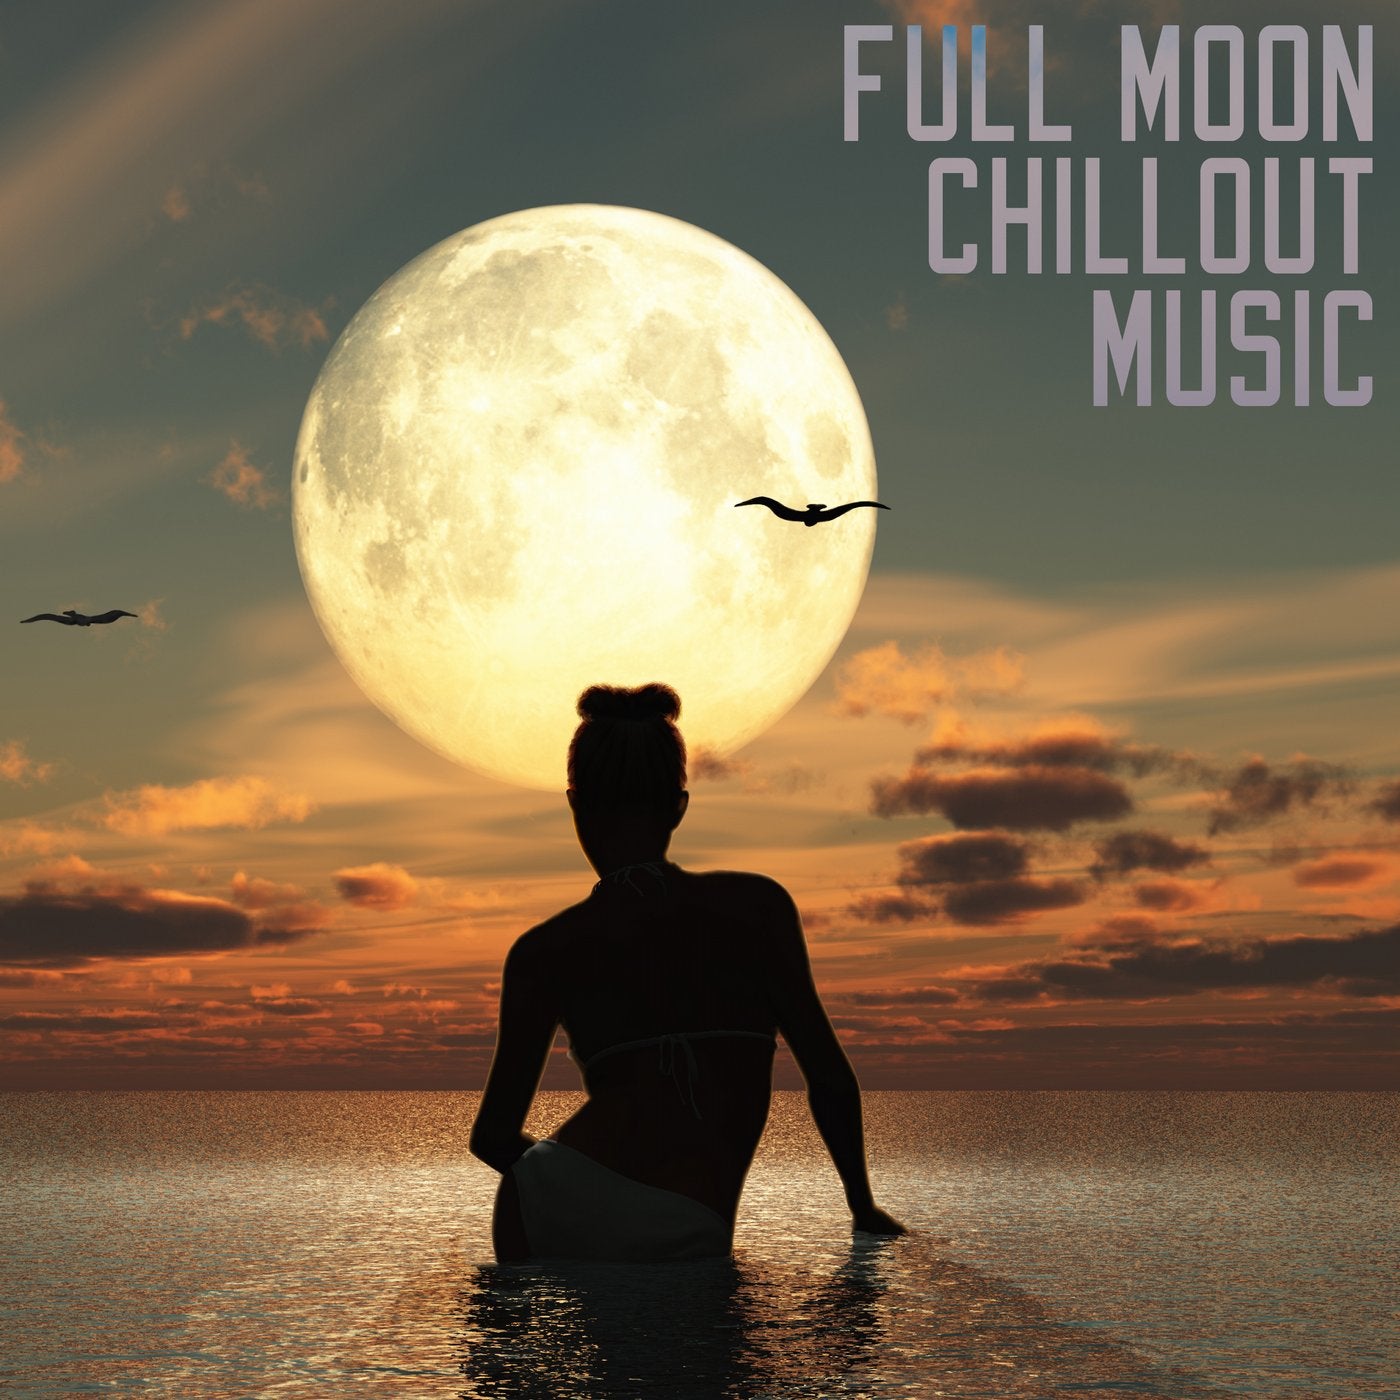 Full Moon Chillout Music